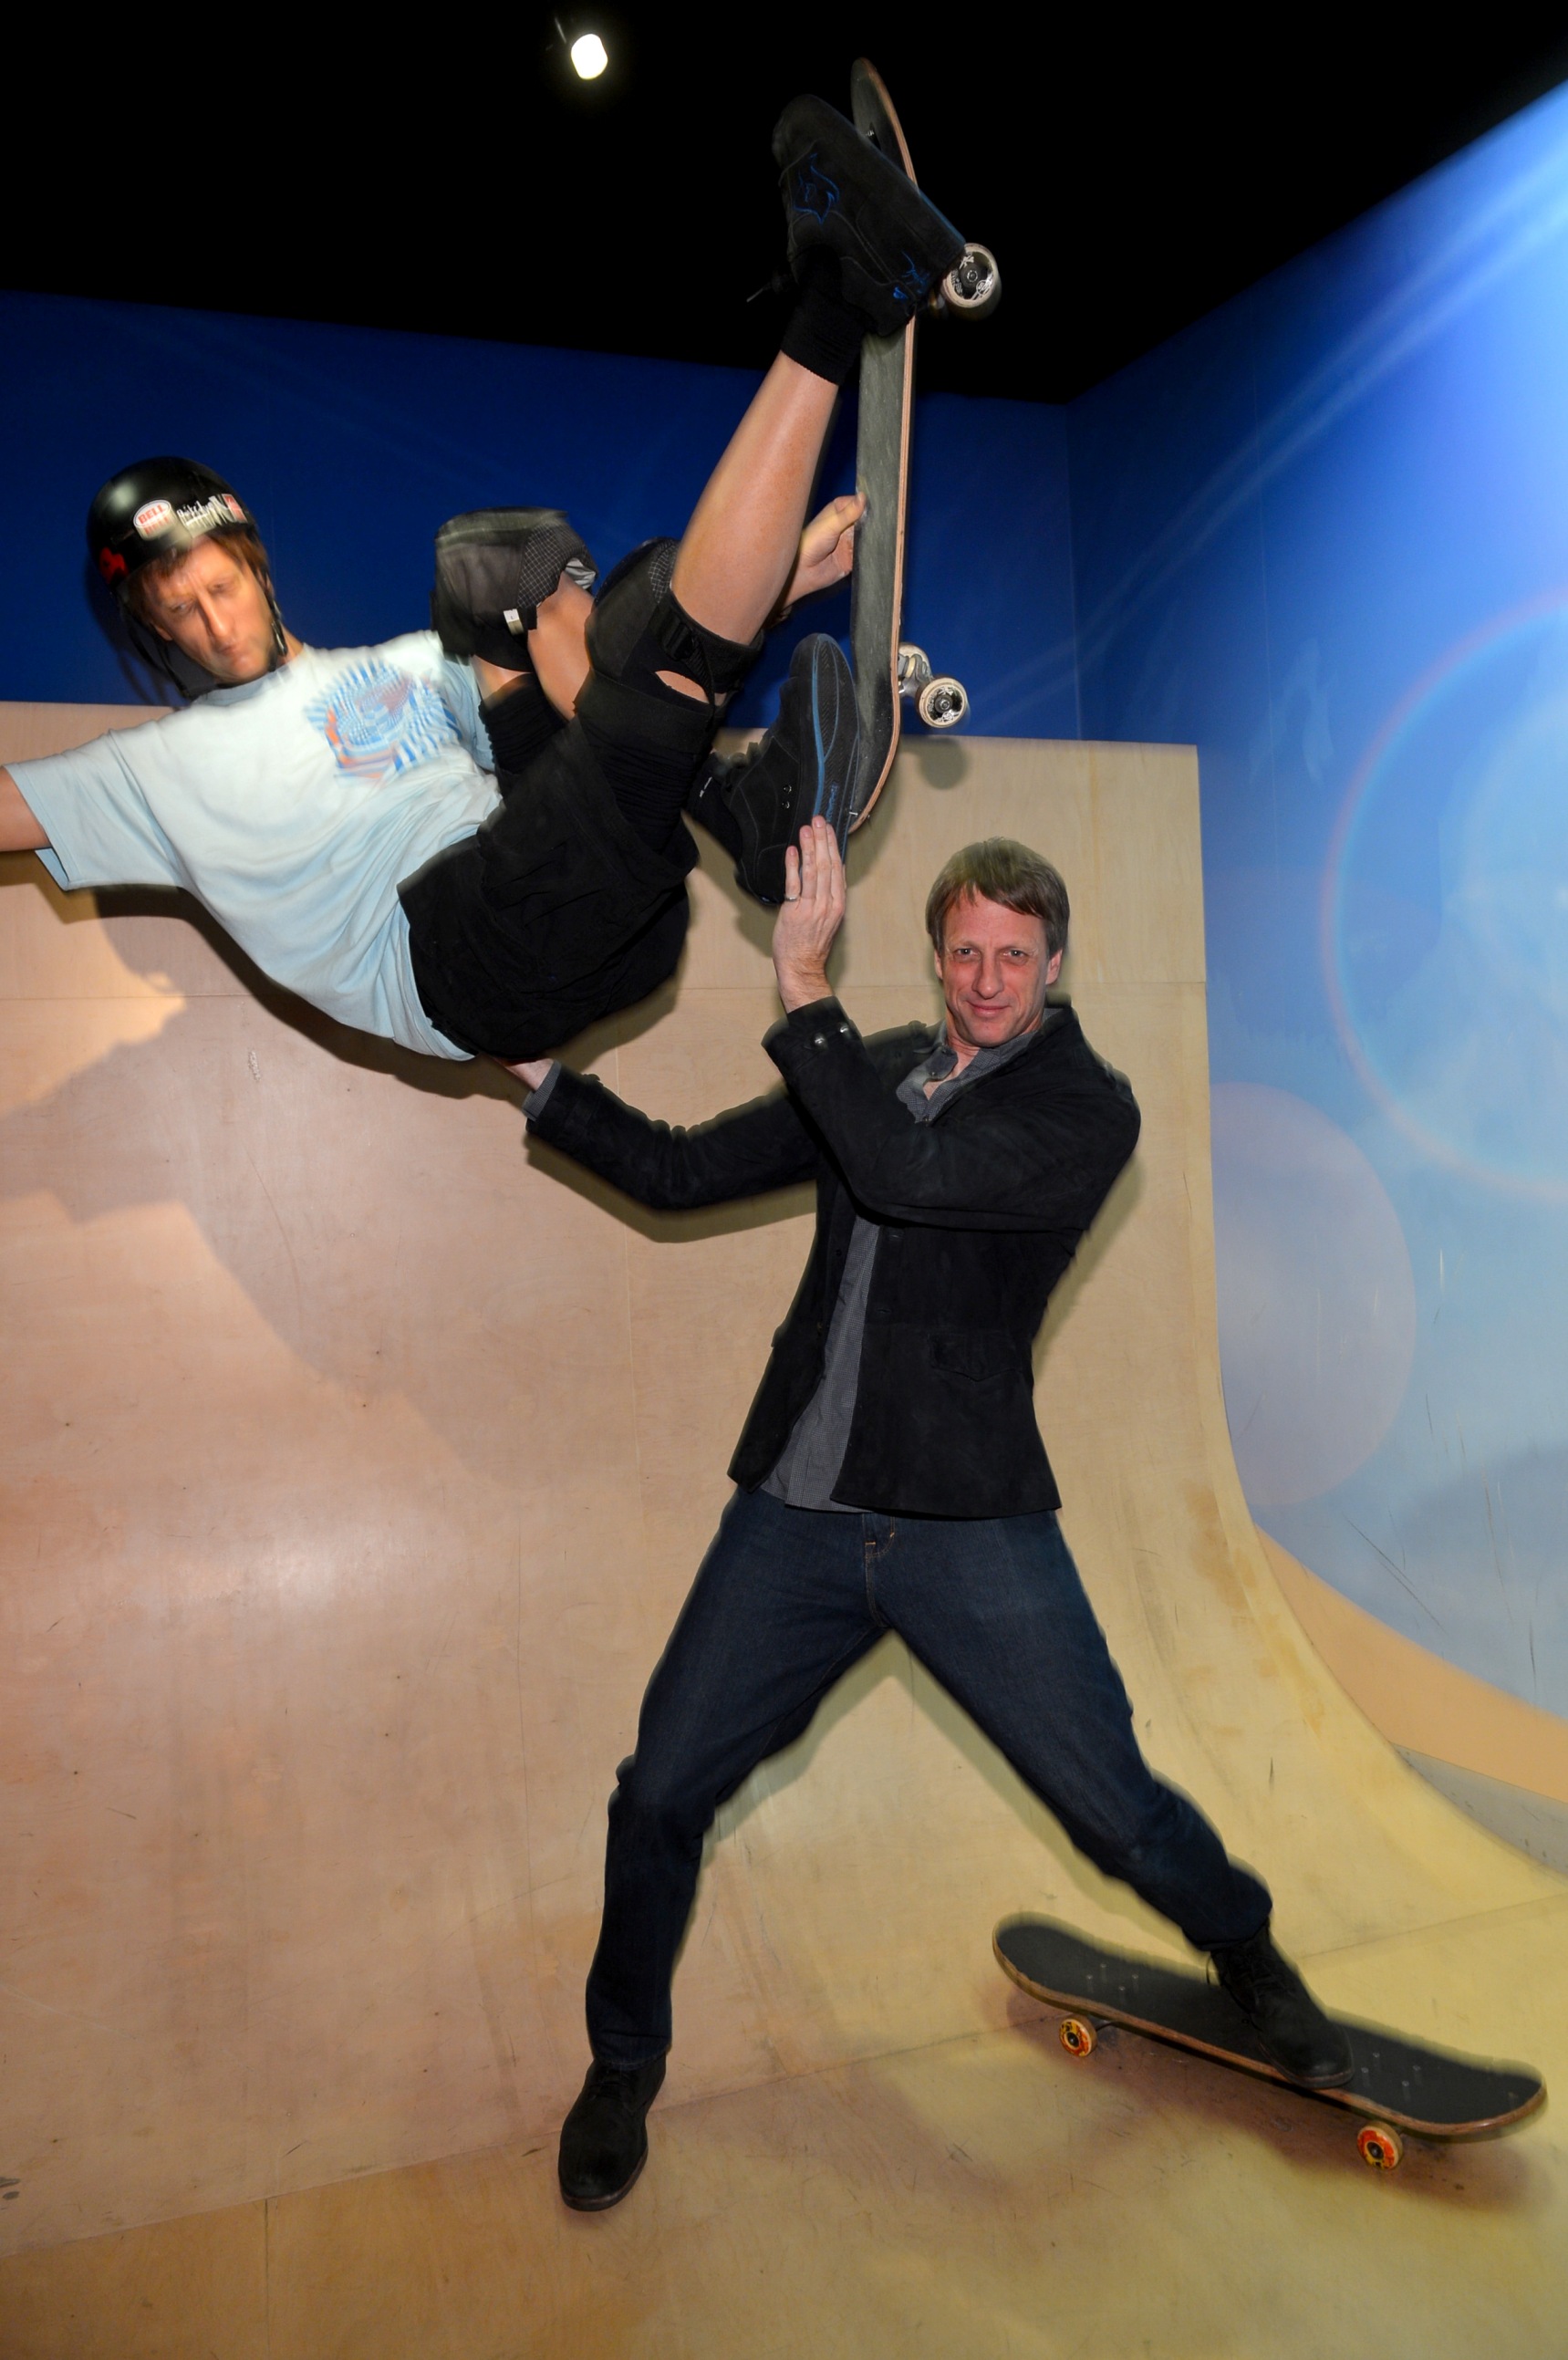 HOLLYWOOD, CA - JANUARY 23:  Professional skateboarder Tony Hawk poses next to a wax figure of himself as he attends Relativity Media's "Movie 43" Los Angeles Premiere held at the TCL Chinese Theatre on Januaprofessional skateboarderry 23, 2013 in Hollywood, California.  (Photo by Alberto E. Rodriguez/Getty Images For Relativity Media)